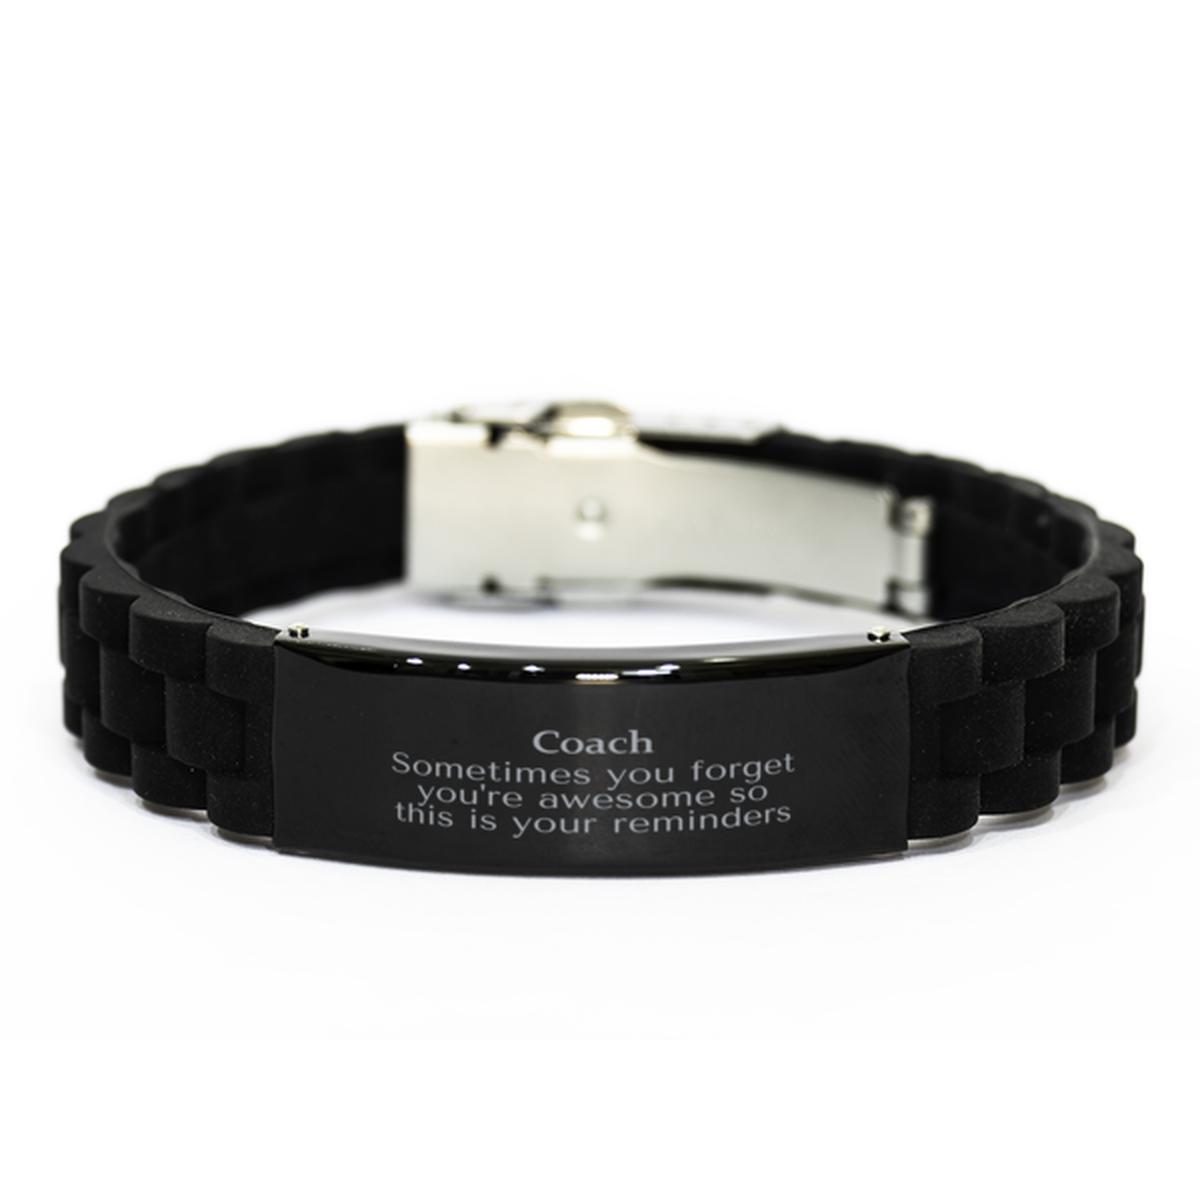 Sentimental Coach Black Glidelock Clasp Bracelet, Coach Sometimes you forget you're awesome so this is your reminders, Graduation Christmas Birthday Gifts for Coach, Men, Women, Coworkers